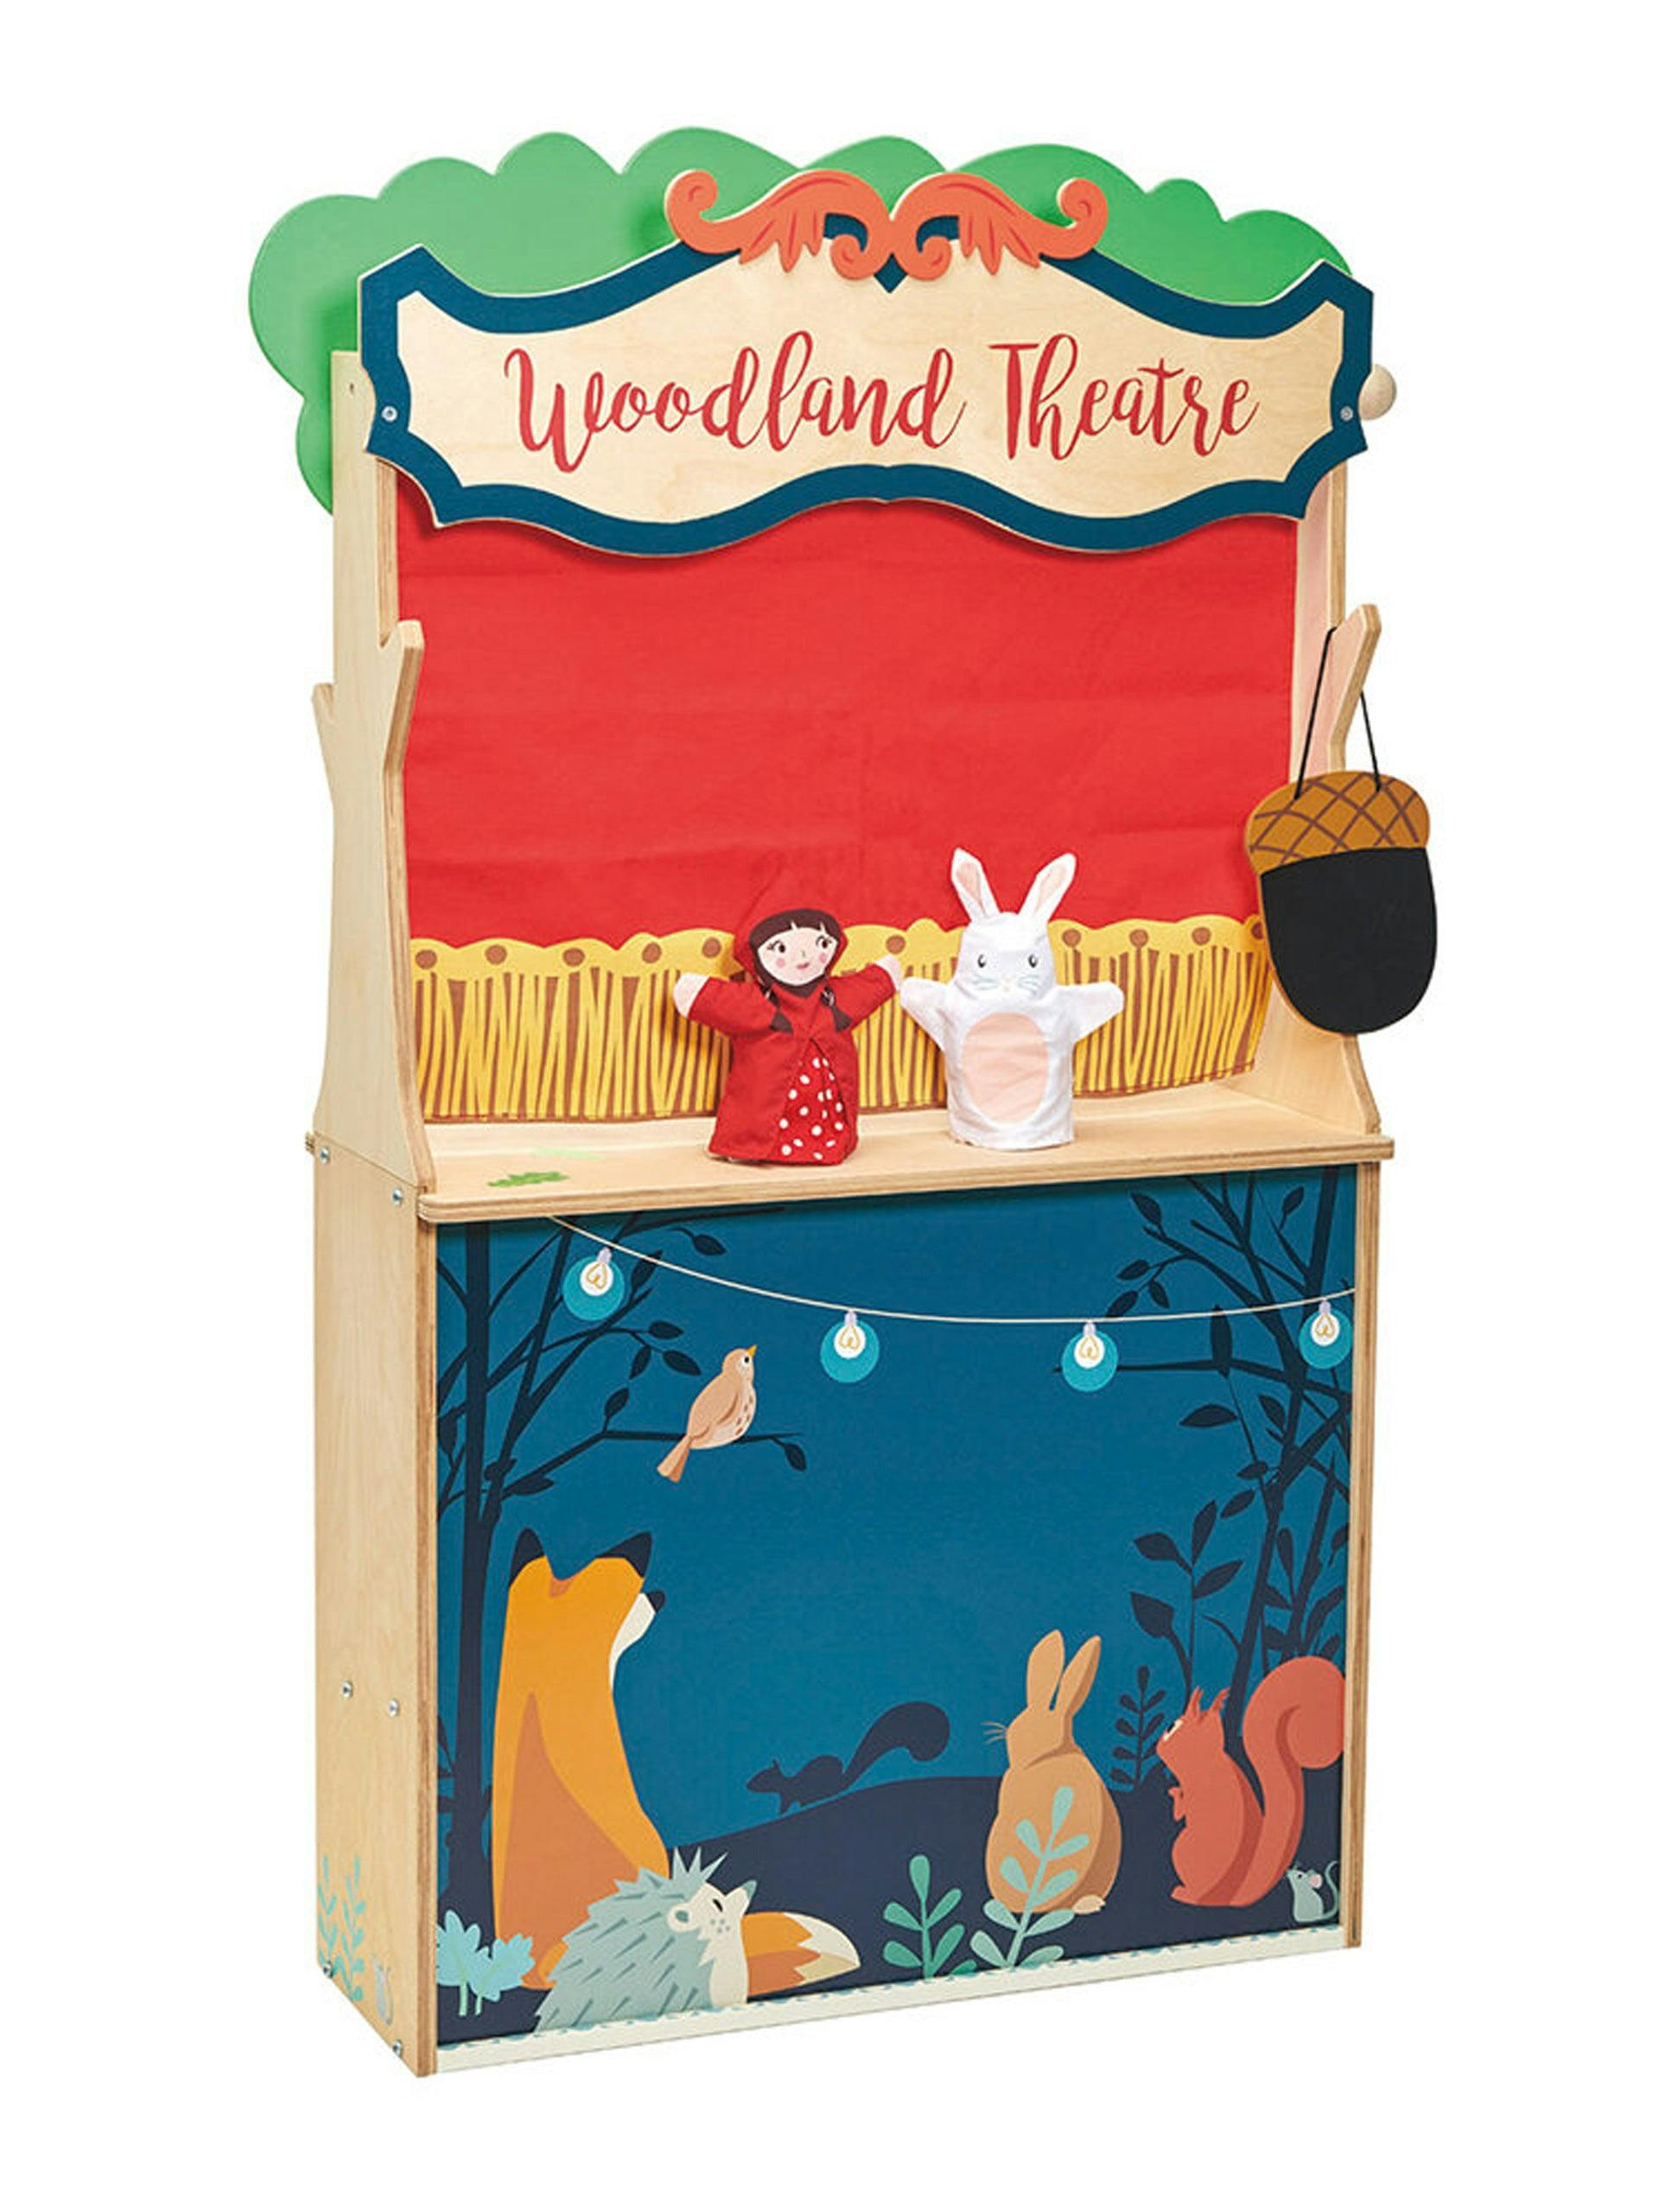 Kids woodland stores and theatre